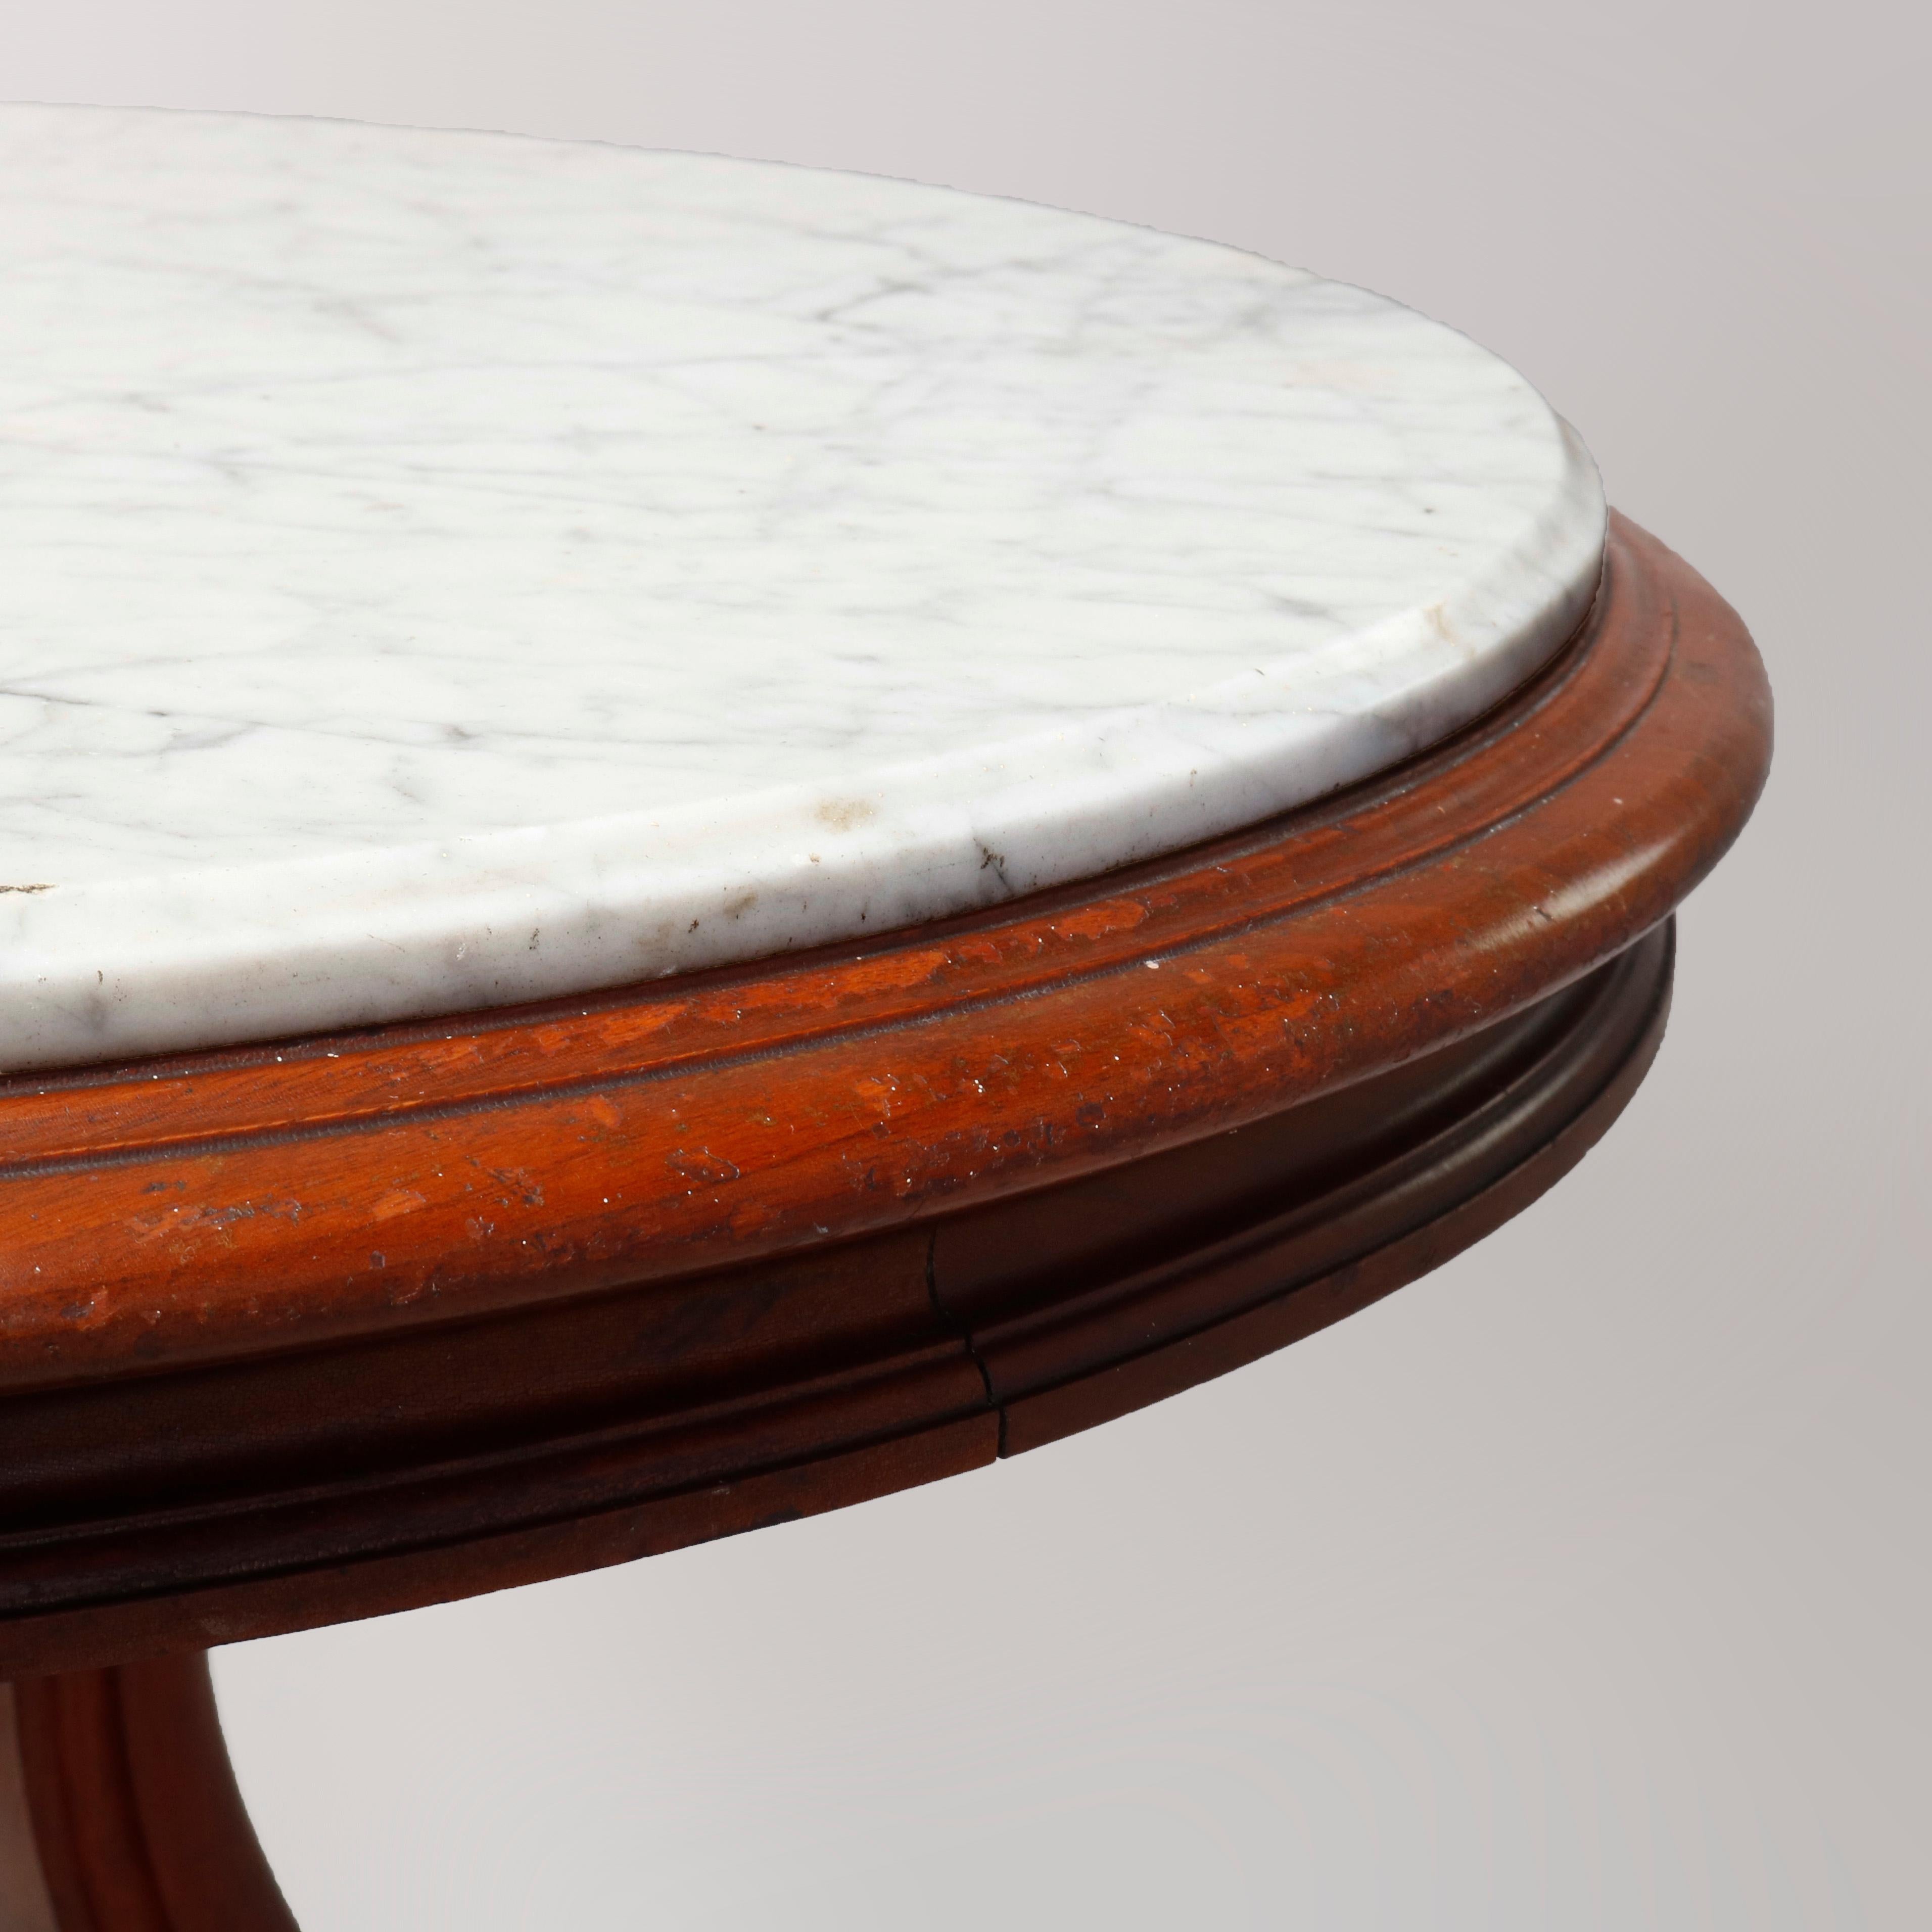 Carved Antique Renaissance Revival Walnut Round Marble-Top Center Table, circa 1890 For Sale